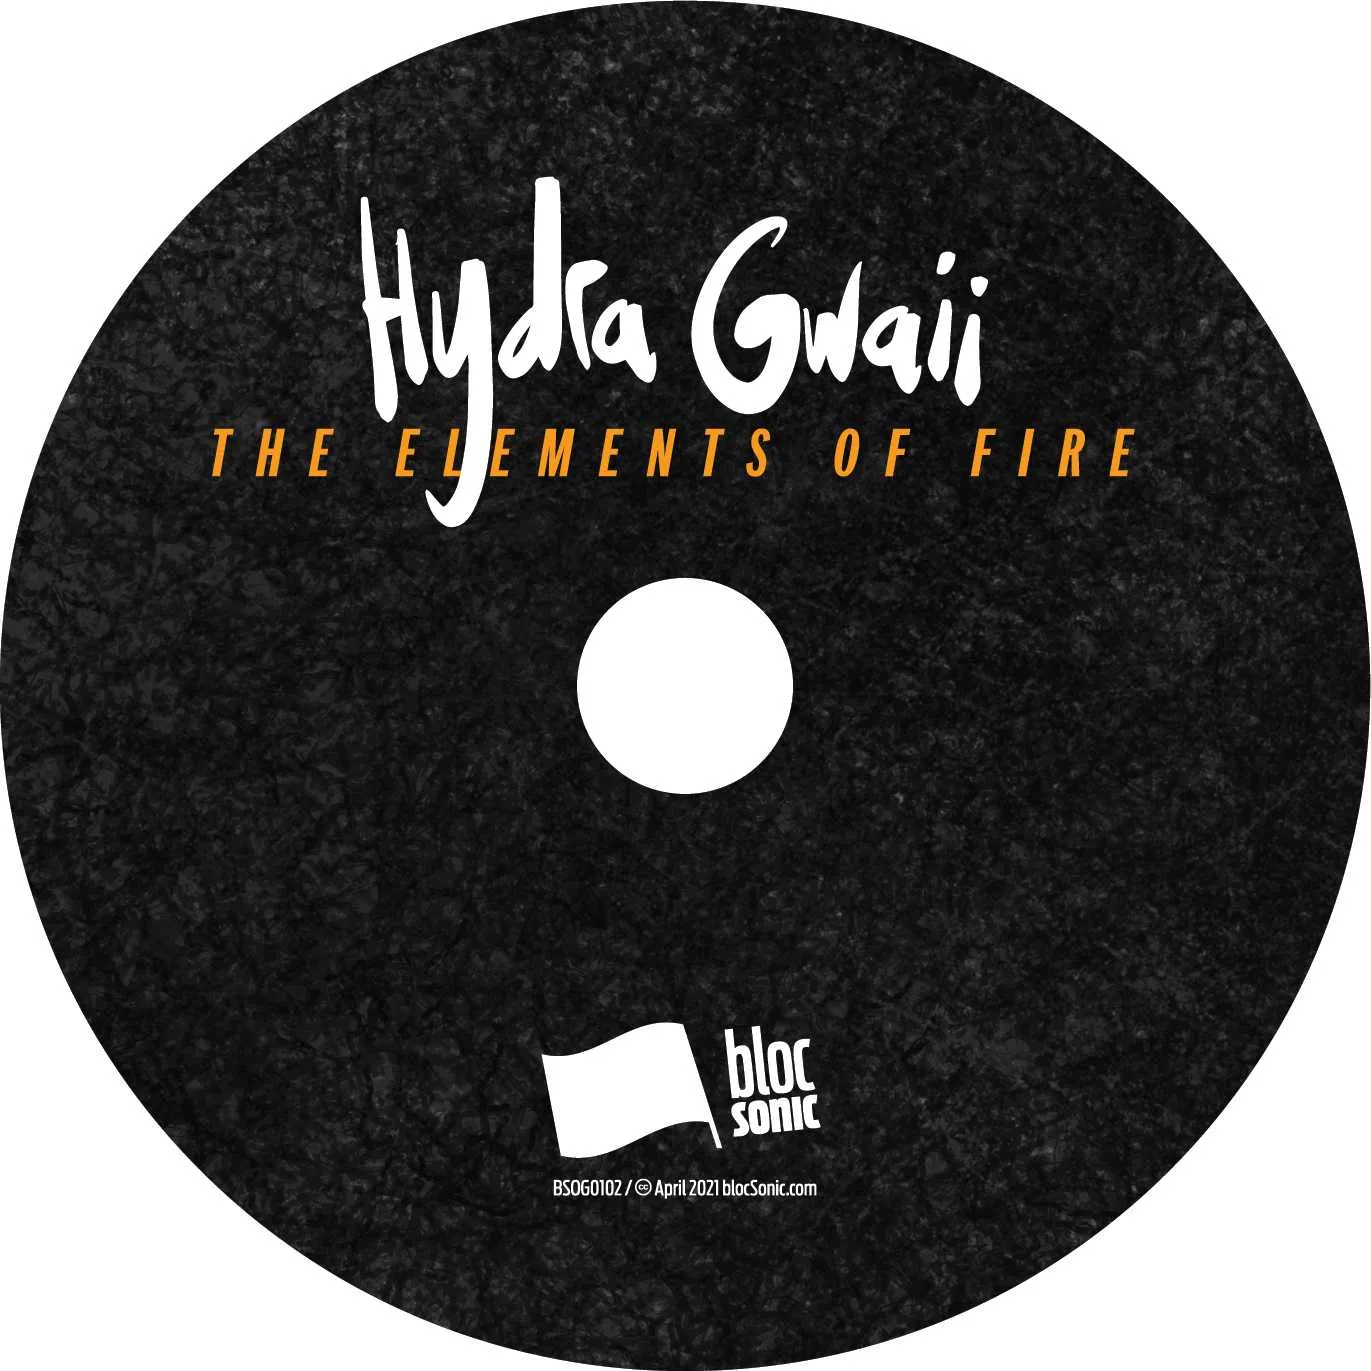 Album disc for “The Elements Of Fire” by Hydra Gwaii